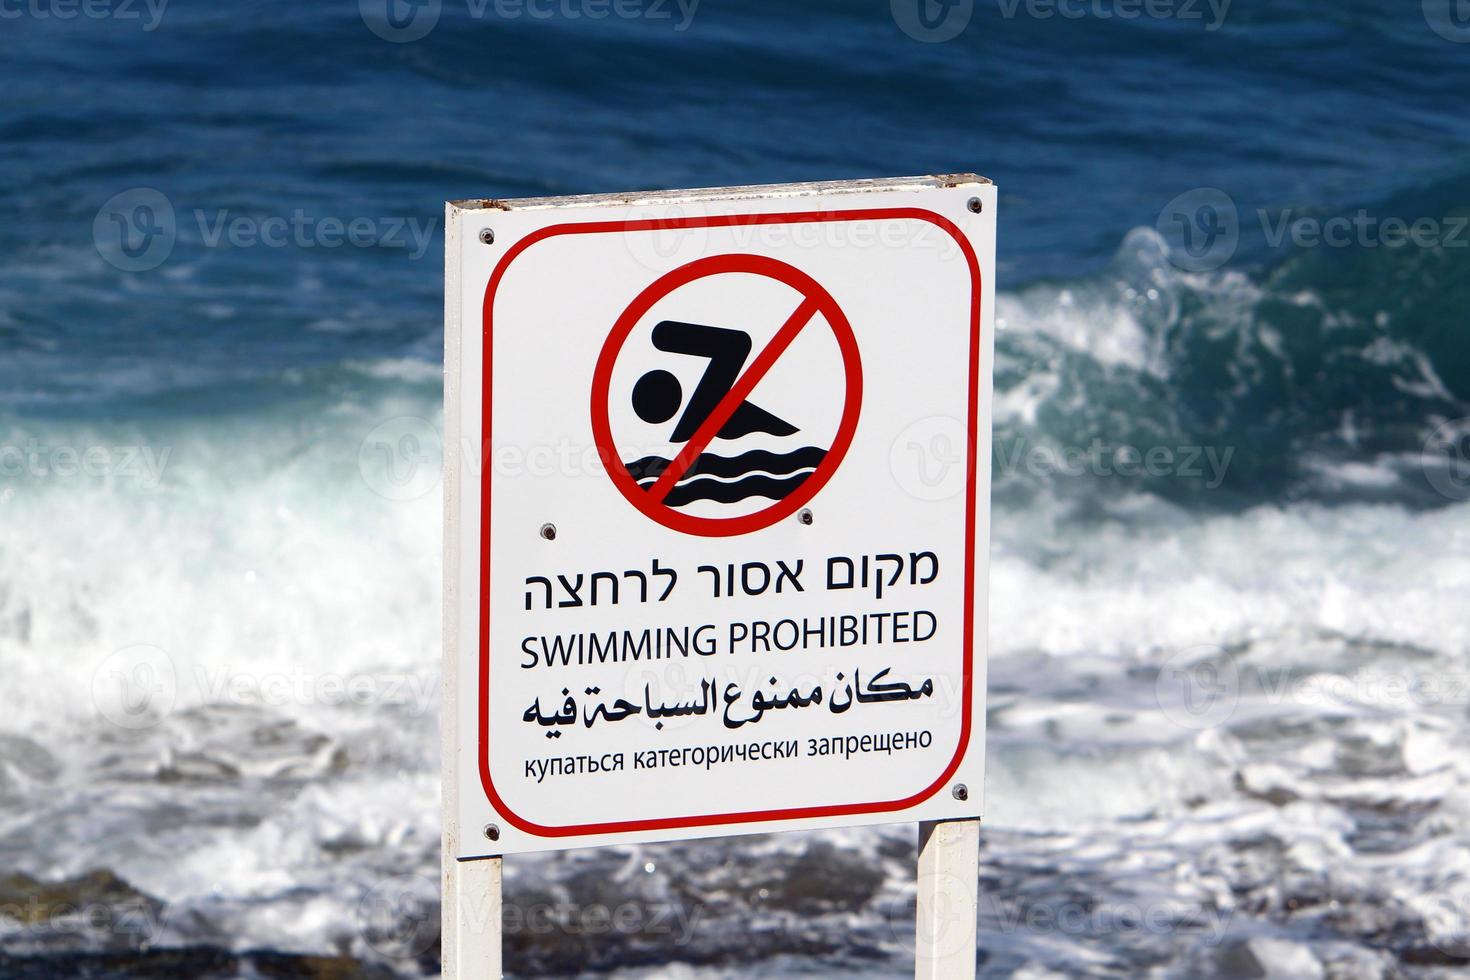 Road signs and signs in Israel. photo